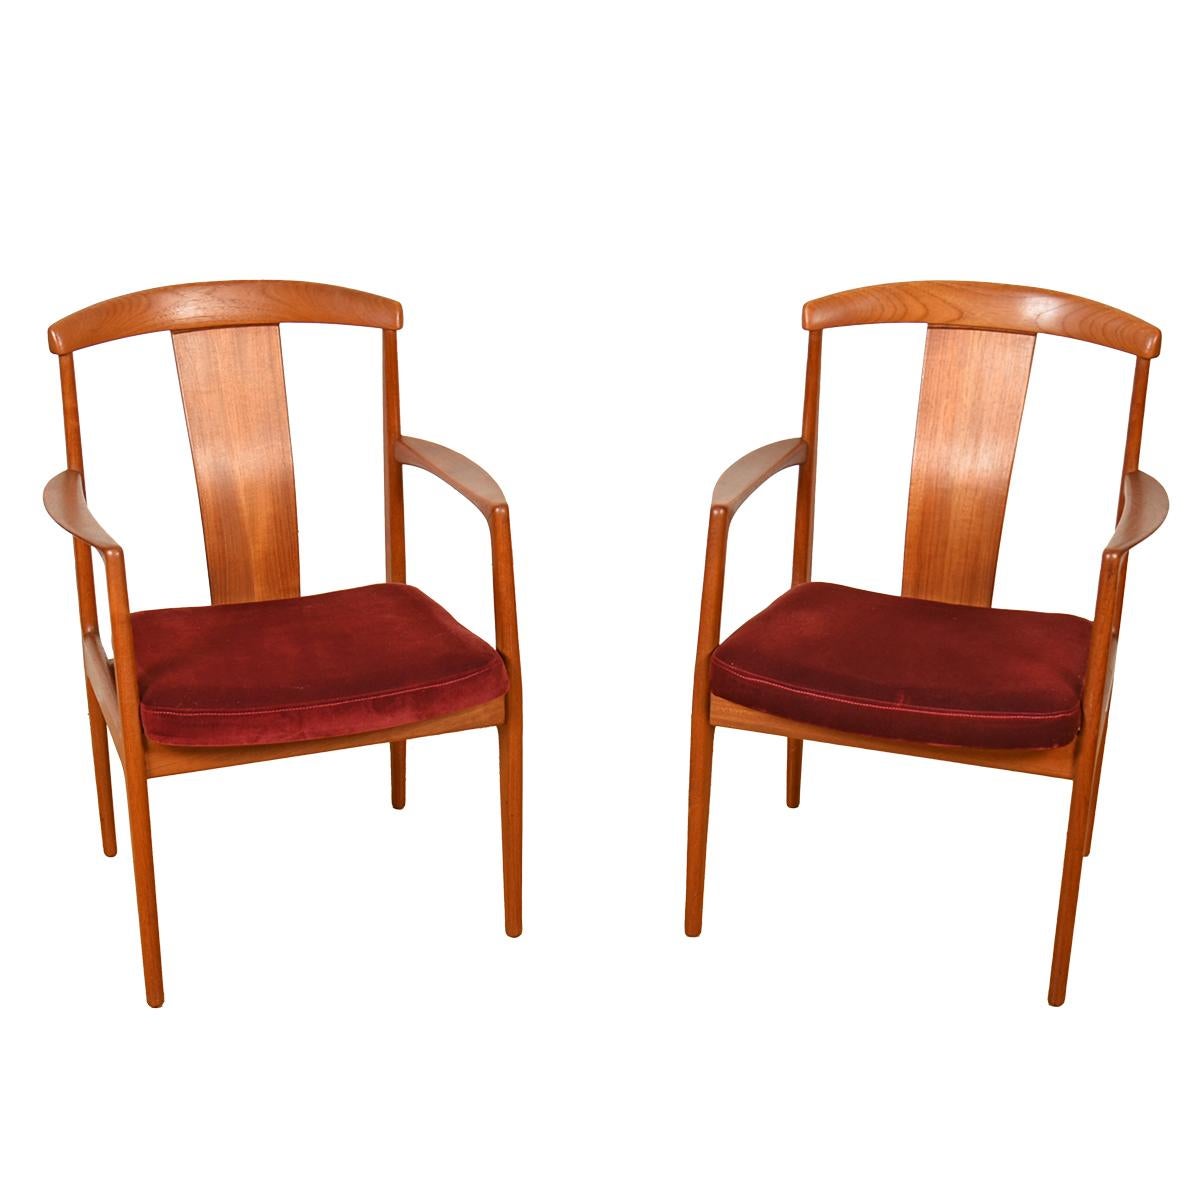 - Exquisite Set of 6 (2+4) Teak Chairs that are elegant and present a subtle statement of excellent design at any dinner party
- Designed by Folke Ohlsson for Dux of Sweden attesting to the high degree of design and manufacturing
- Also Extremely